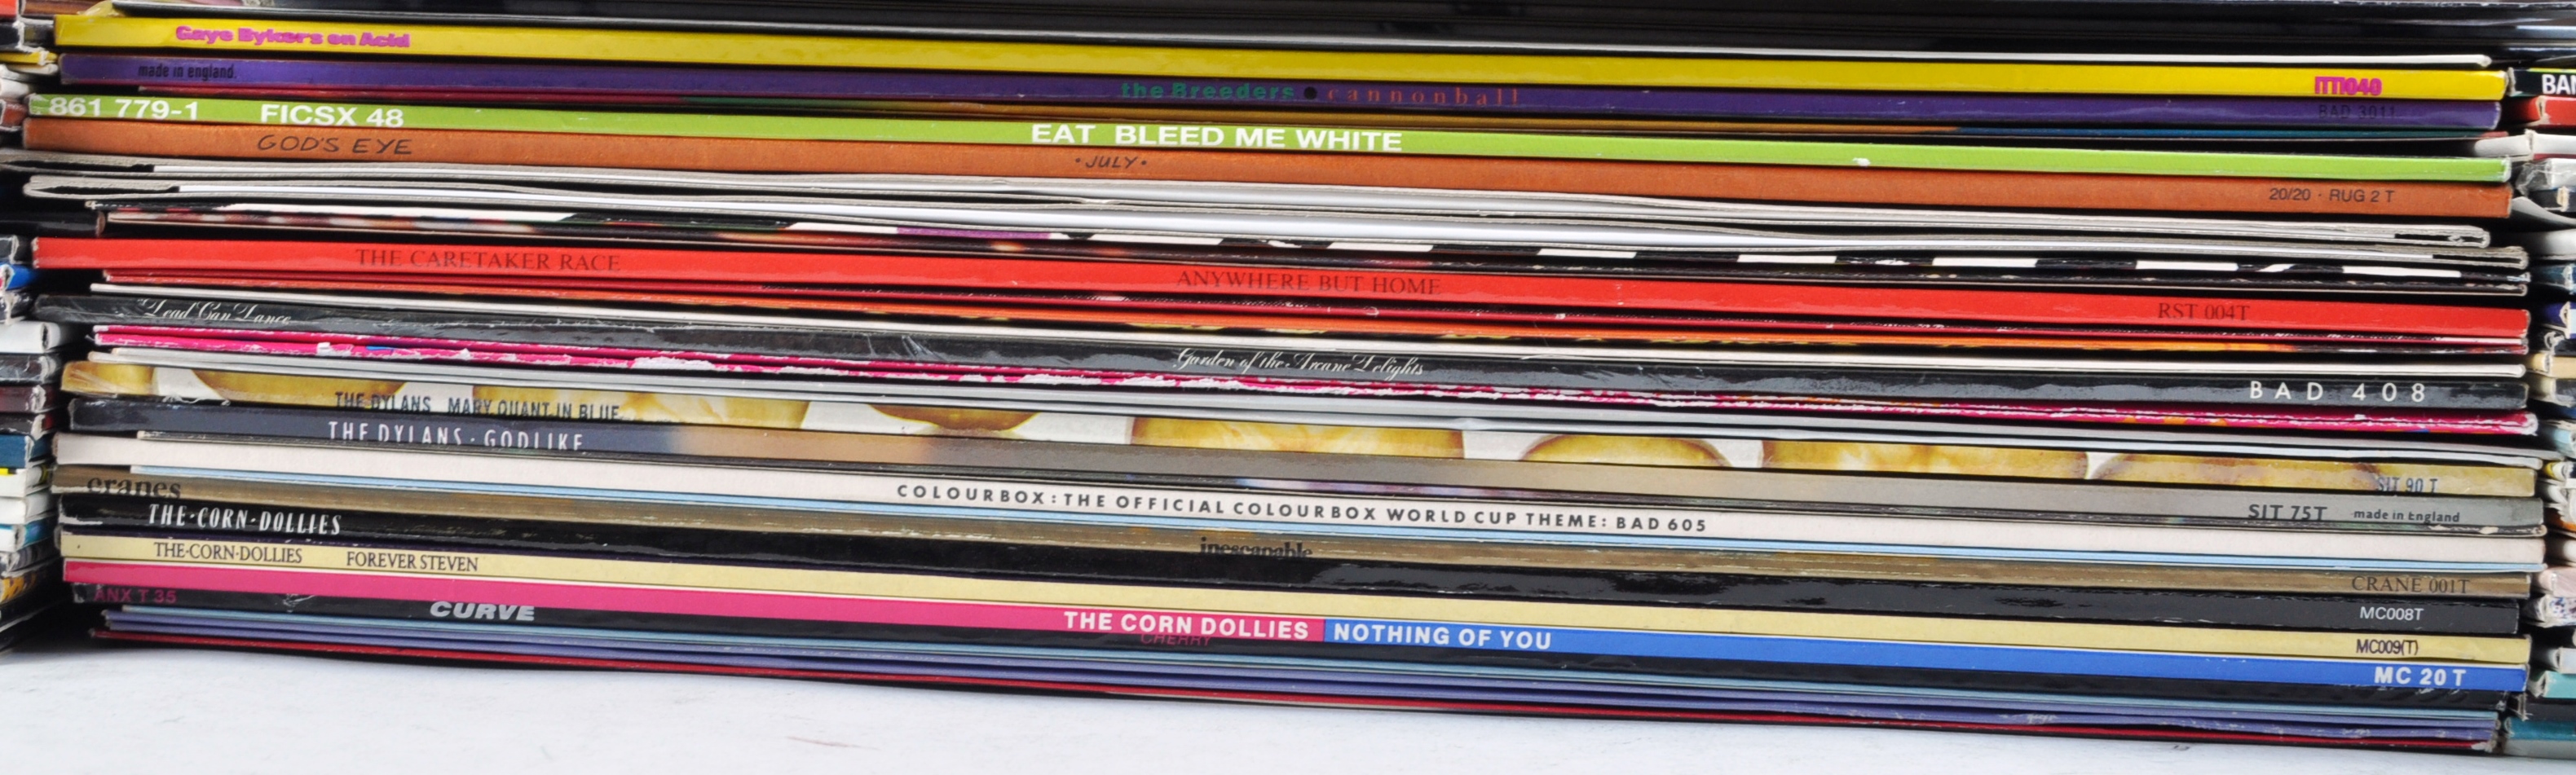 COLLECTION OF APPROX 100 12" VINYL SINGLES OF VARYING ARTIST - Image 3 of 6